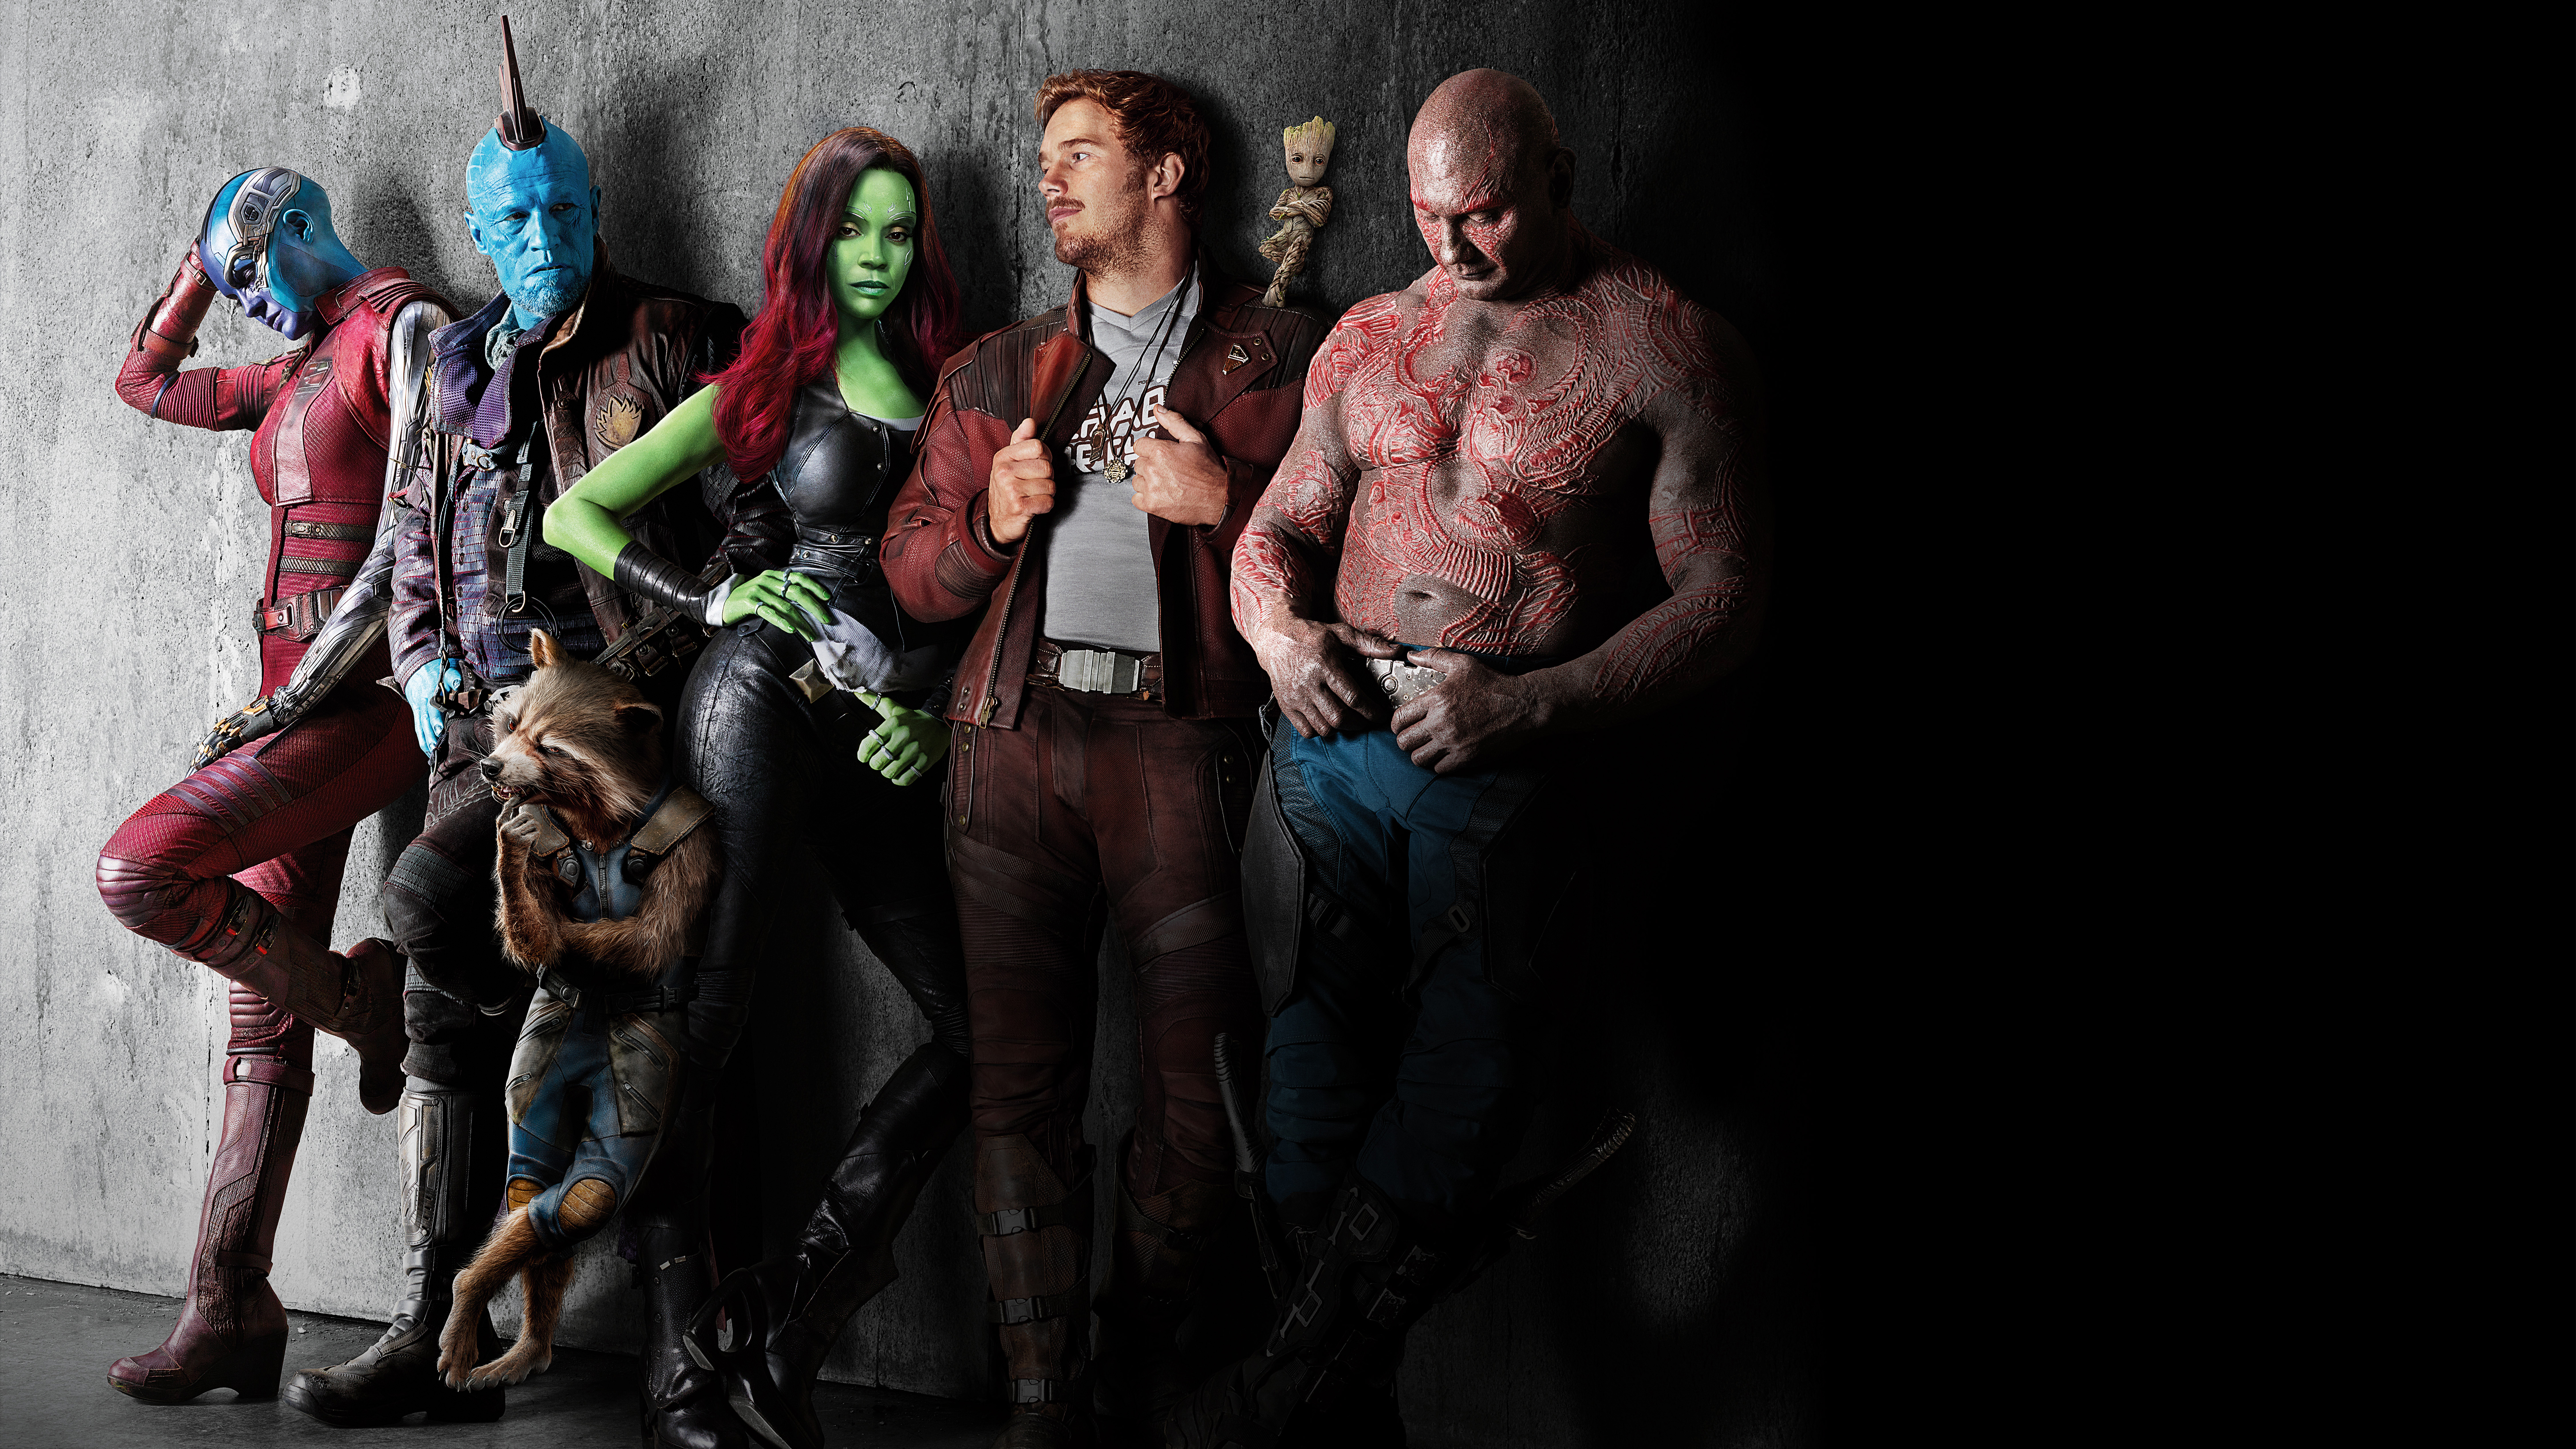 General 7680x4320 fantasy art Guardians of the Galaxy Gamora  Nebula (Marvel) Marvel Cinematic Universe Star-Lord Peter Quill Drax the Destroyer Rocket Raccoon Yondu Udonta